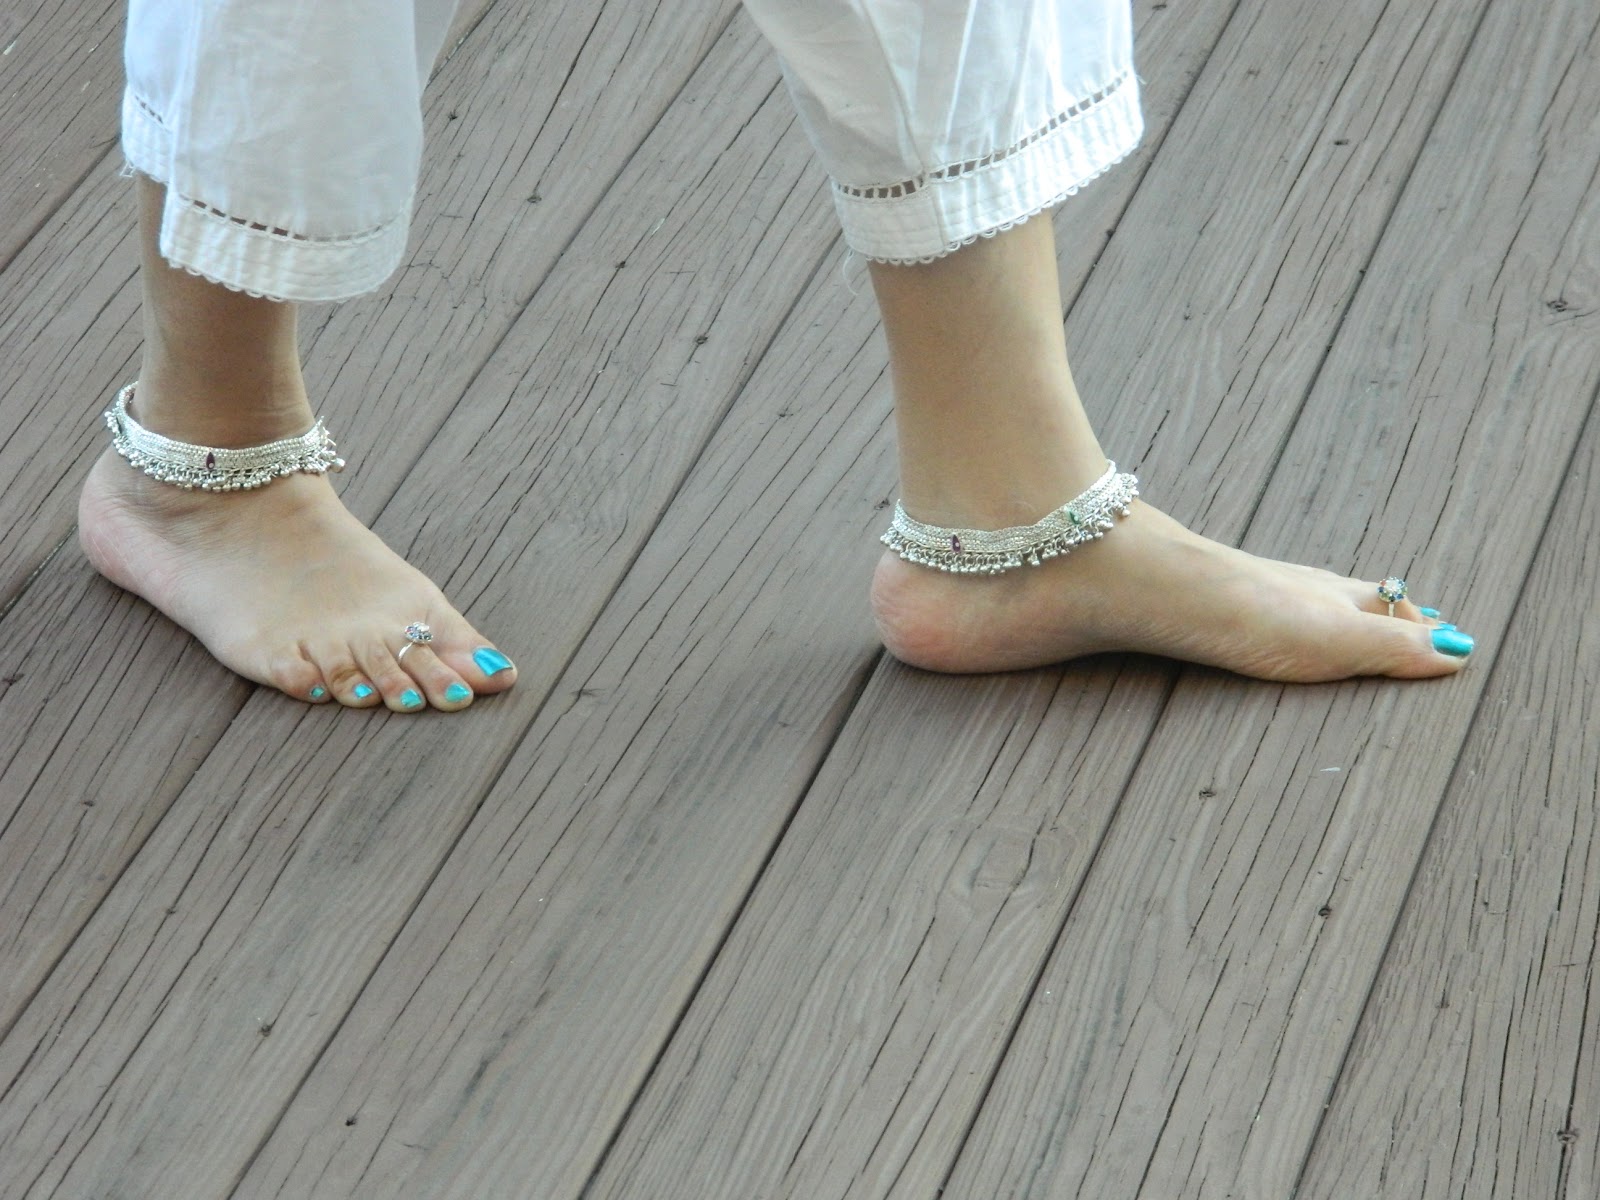 Sat foot. Анклет на ногу. Indian feet. Indian Anklet feet. Barefoot Forever.